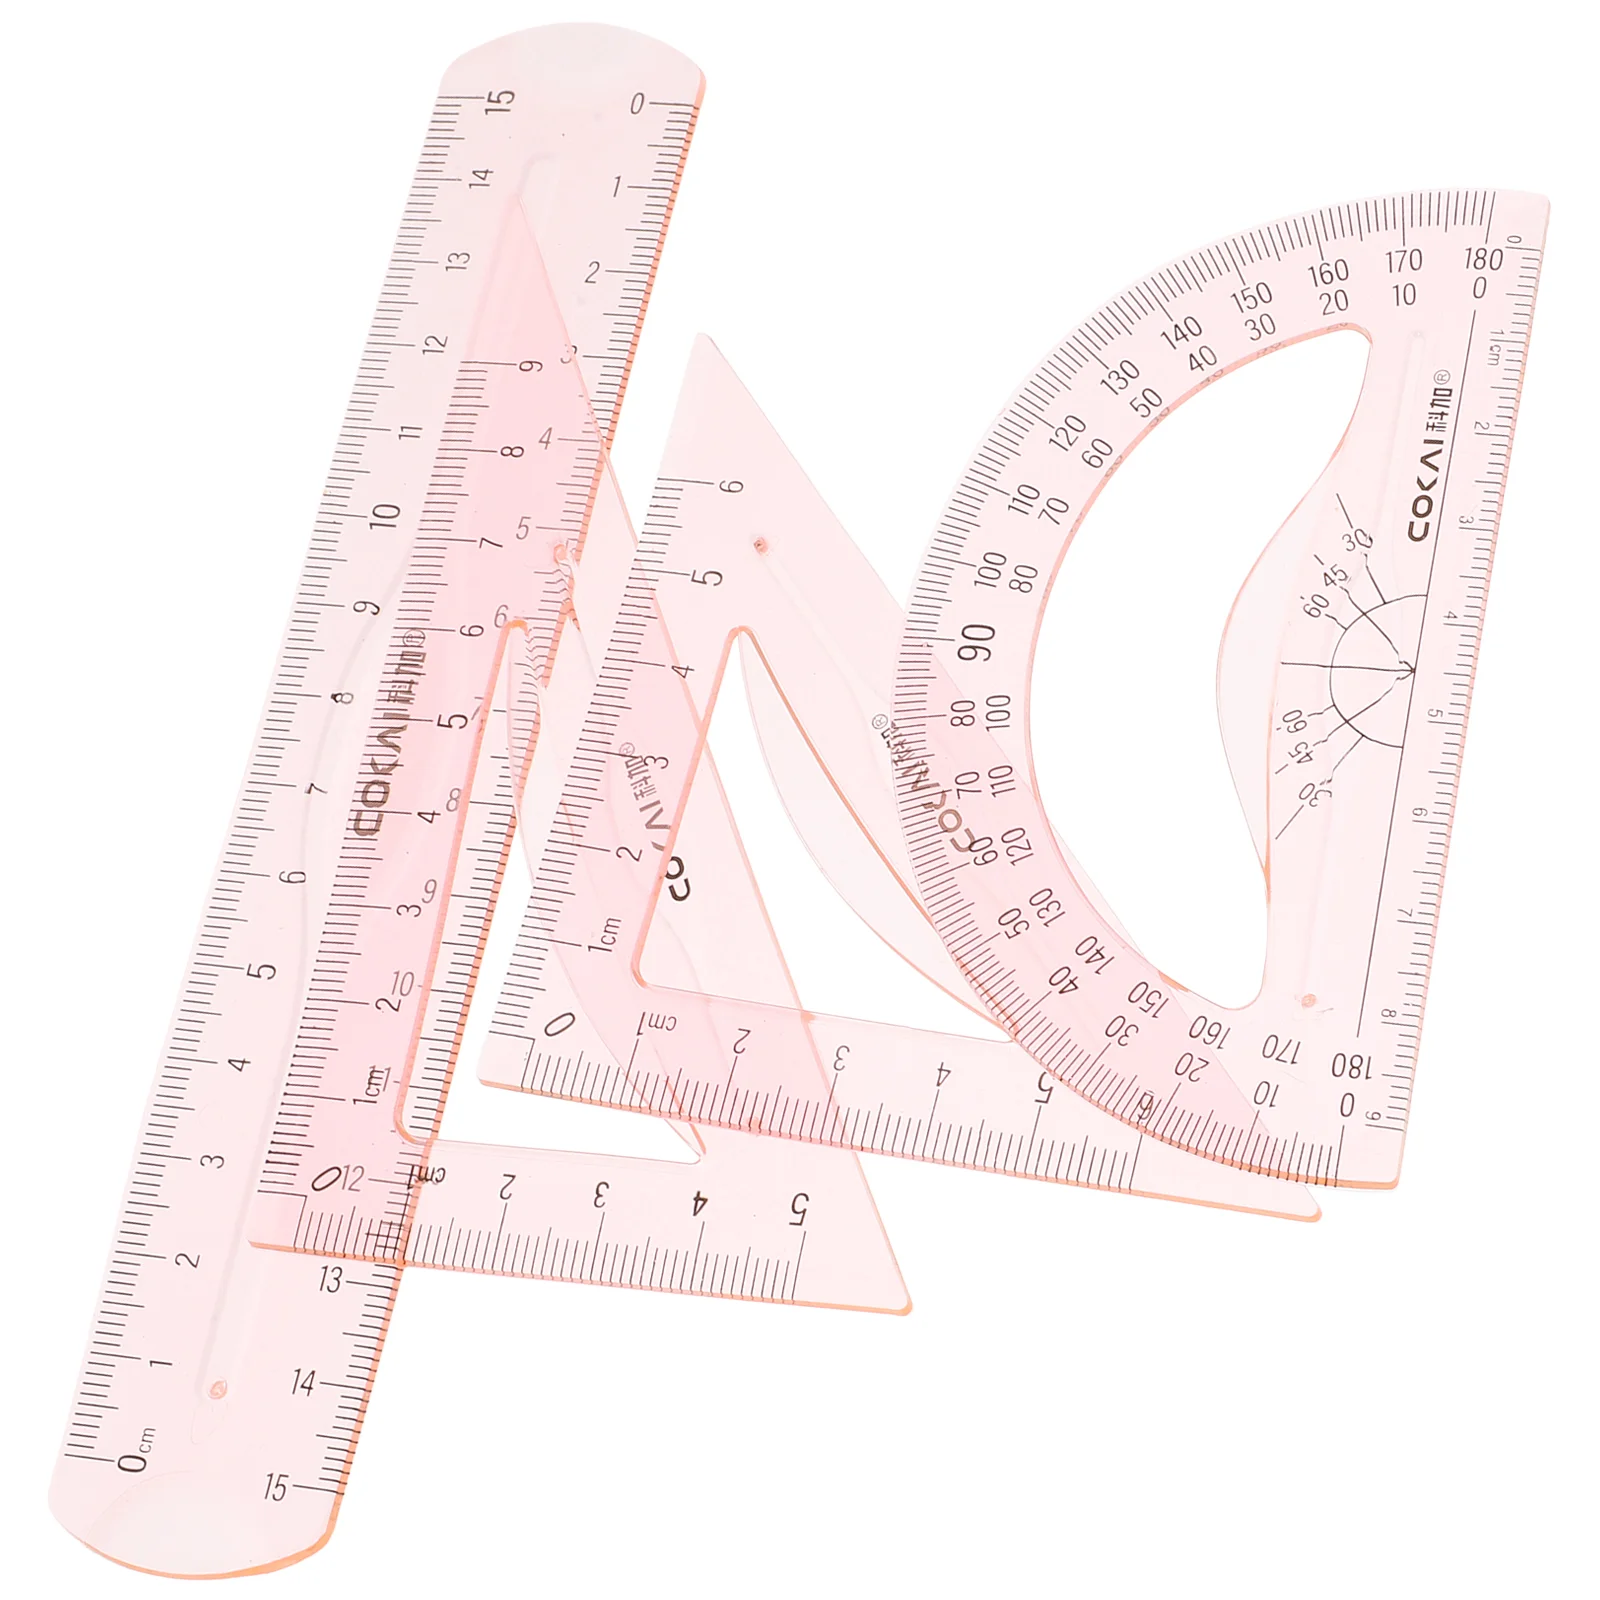 

4pcs/Set Plastic Straight Triangle Ruler Geometry Protractor Drafting Ruler Precise Measuring Ruler School Office Stationery